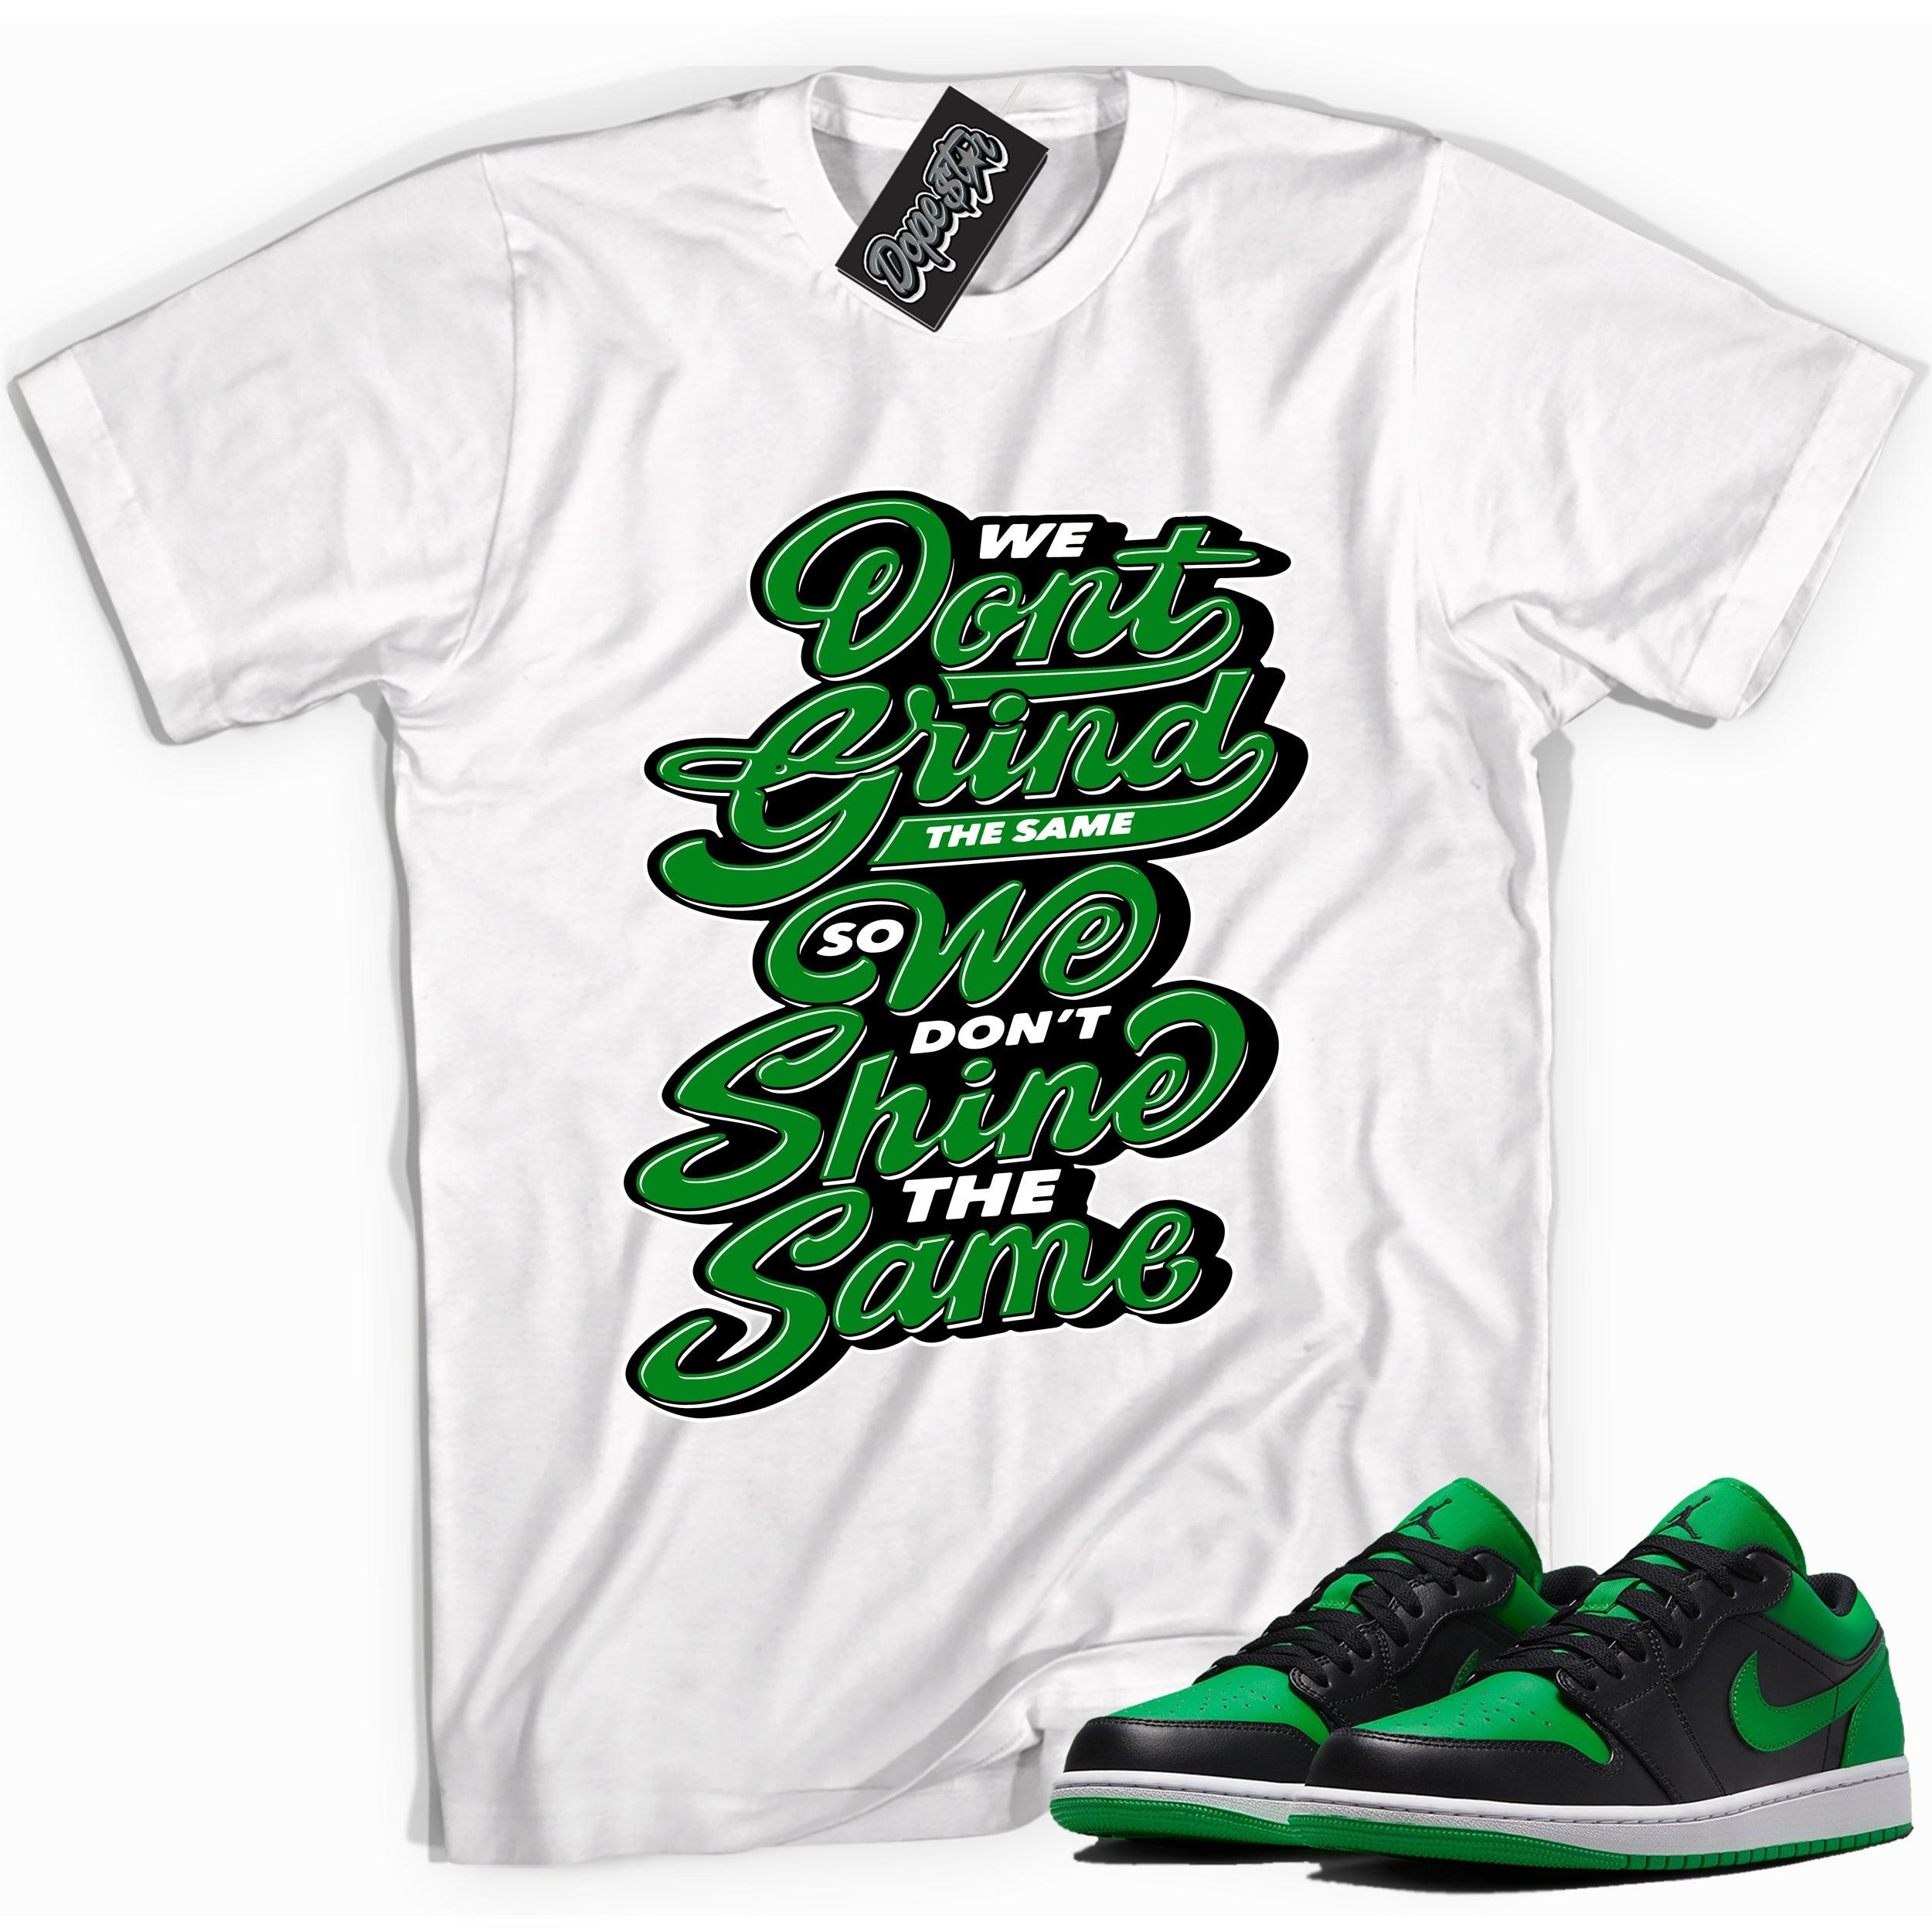 Cool white graphic tee with 'We Don't Grind The Same' print, that perfectly matches Air Jordan 1 Low Lucky Green sneakers